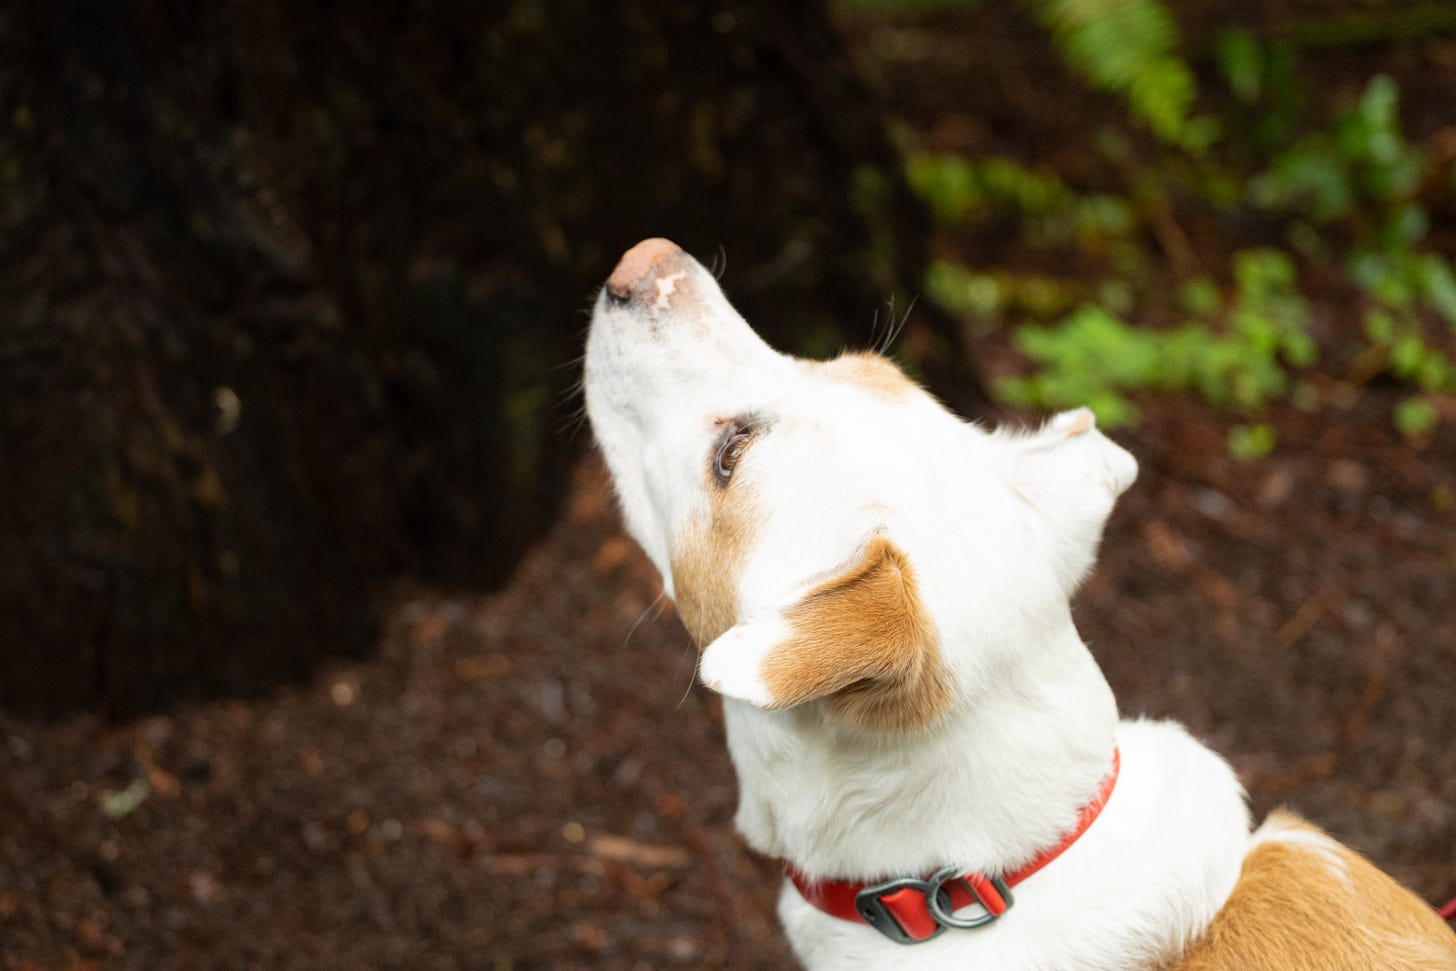 A tan and white dog wearing a red collar looks up at redwoods.